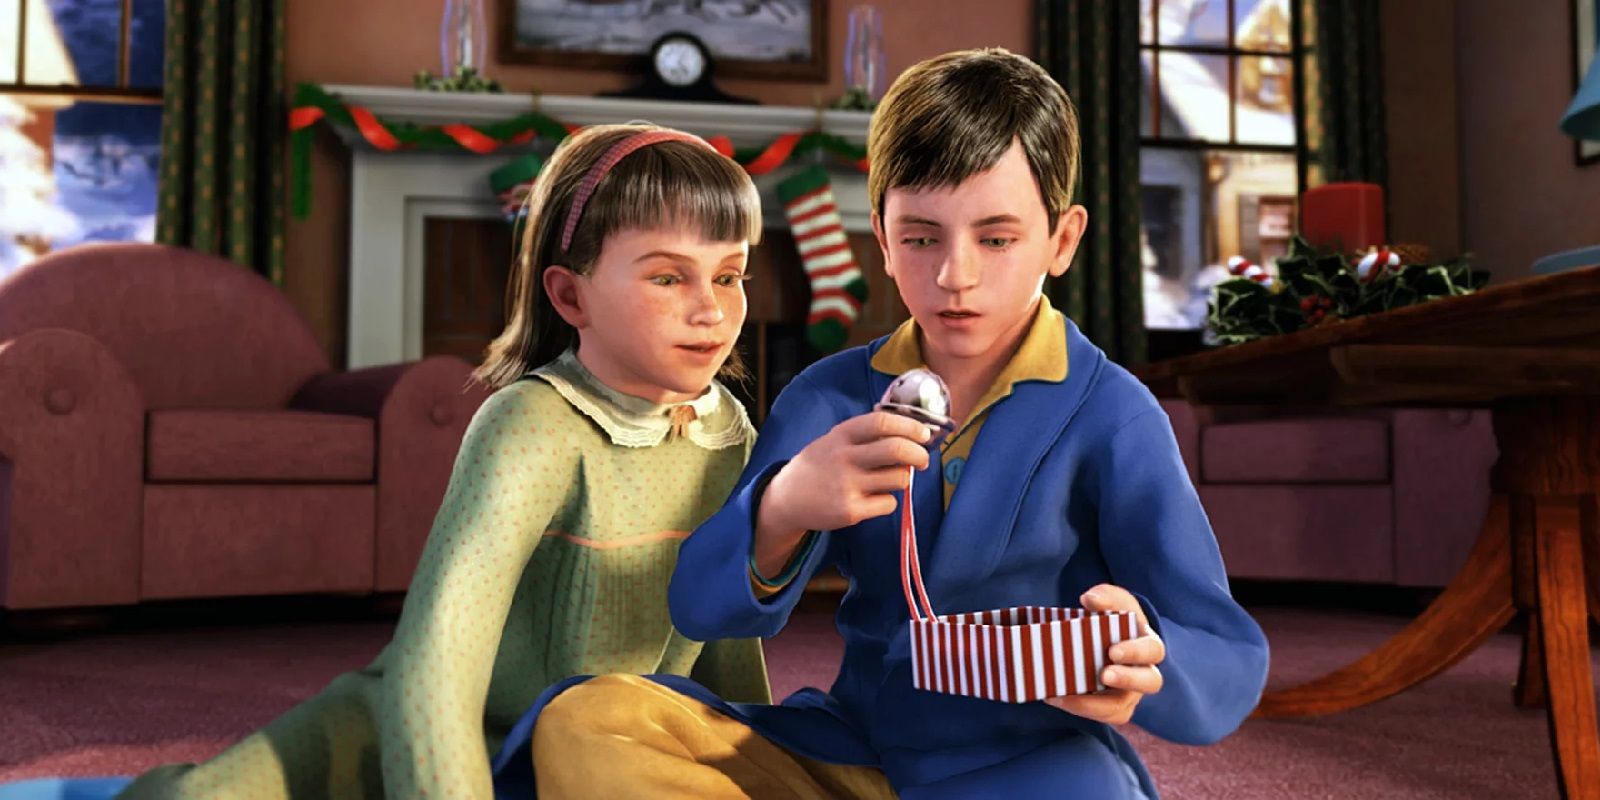 The 10 Most Overrated Christmas Movies According To Reddit